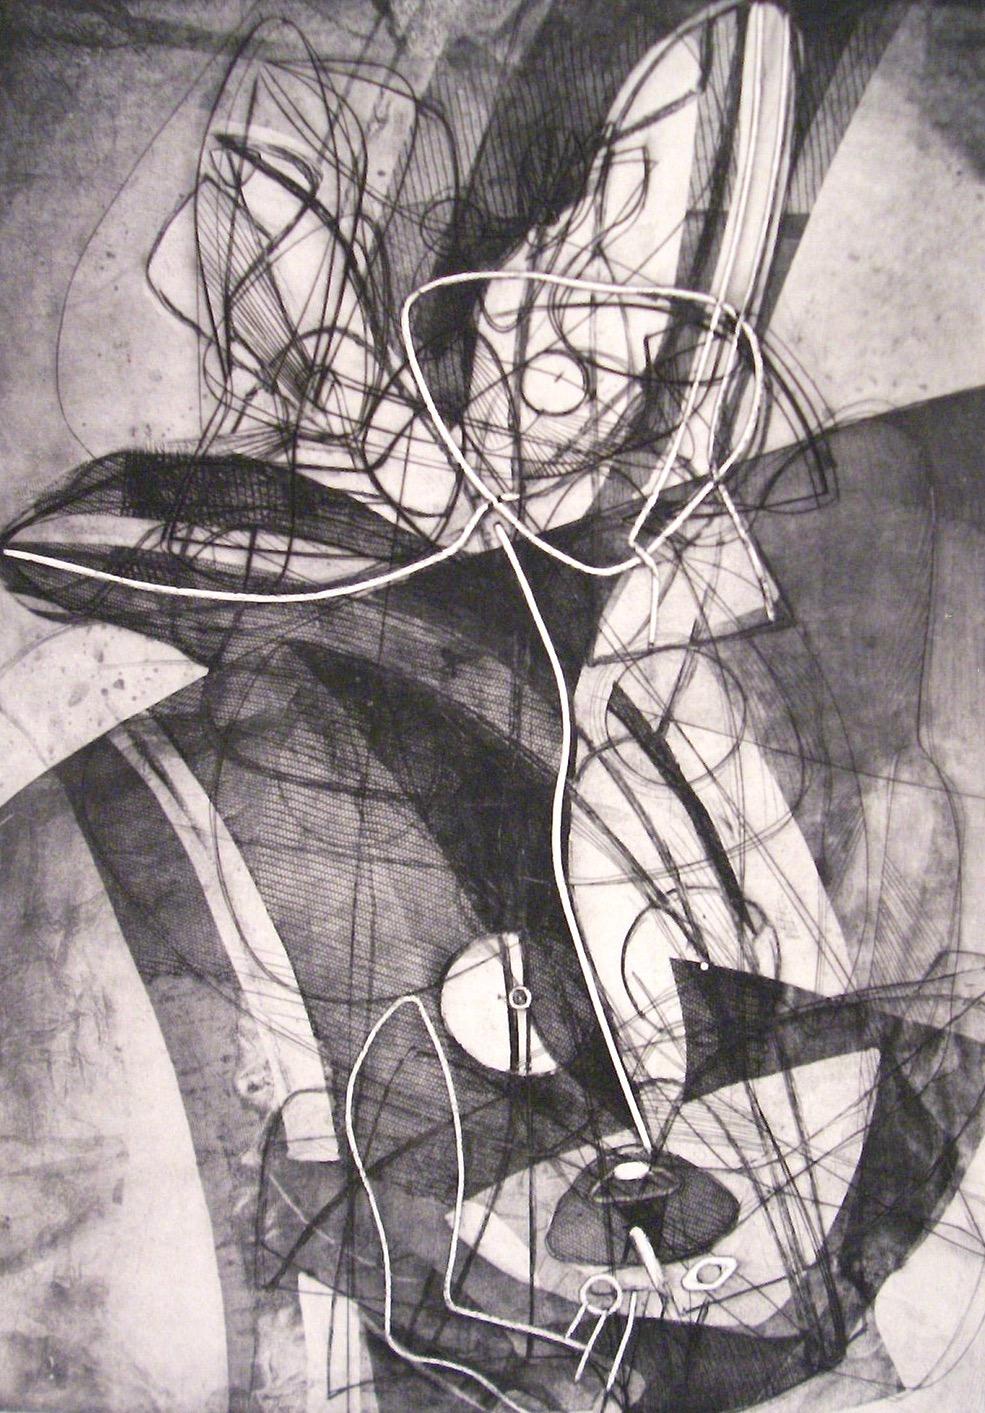 Black and Moorehead 198, edition of 50.
Signed, titled, and numbered, in pencil.
Made shortly after Stanley William Hayter returned to his Paris Atelier 17 from New York, Trois Personnage is a classic Hayter print: an extremely complex subject